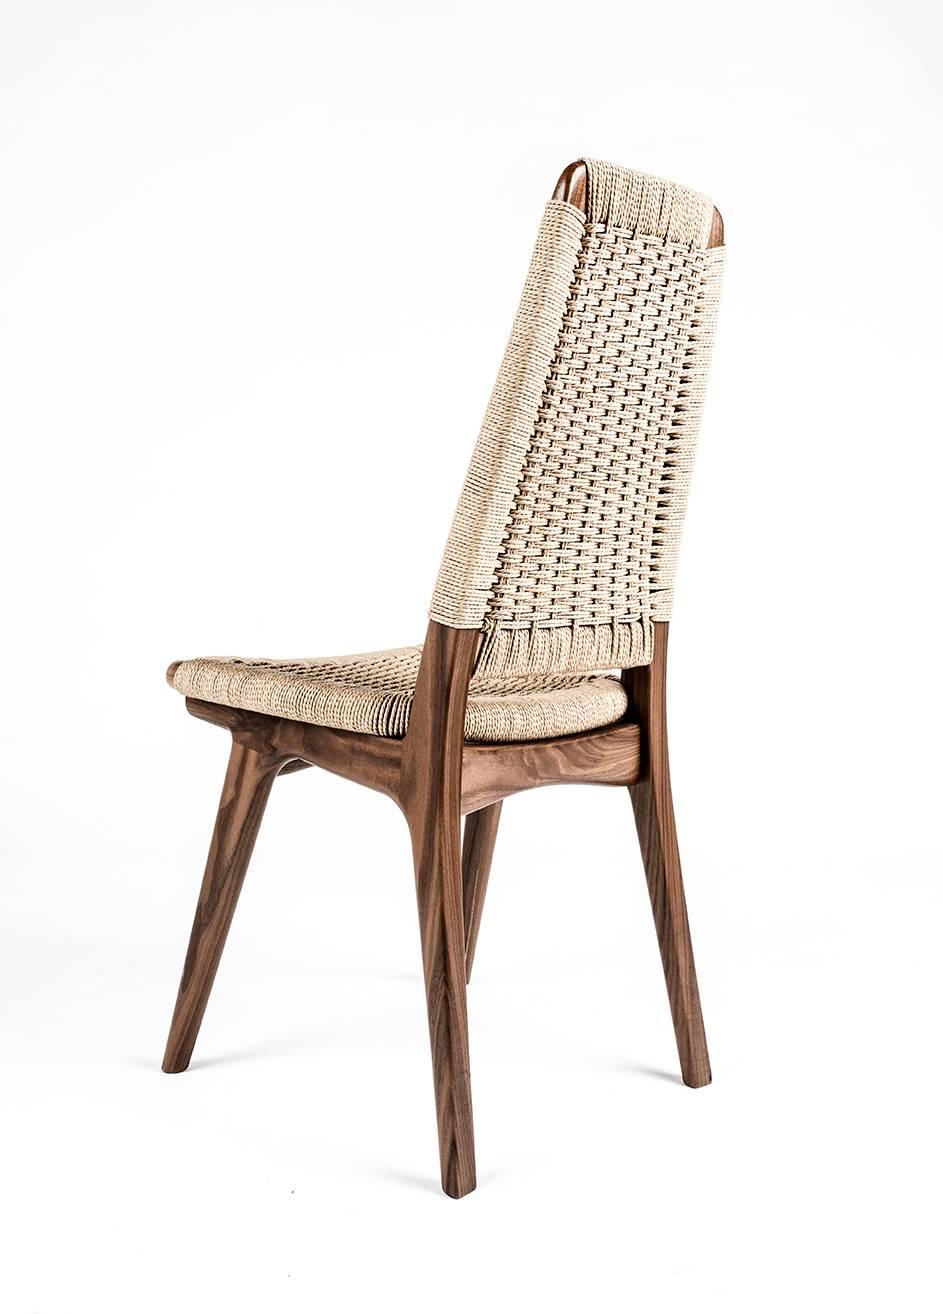 Hand-Crafted Sample Sale, High Back Dining Chair, Woven Danish Cord, Walnut, Mid-Century